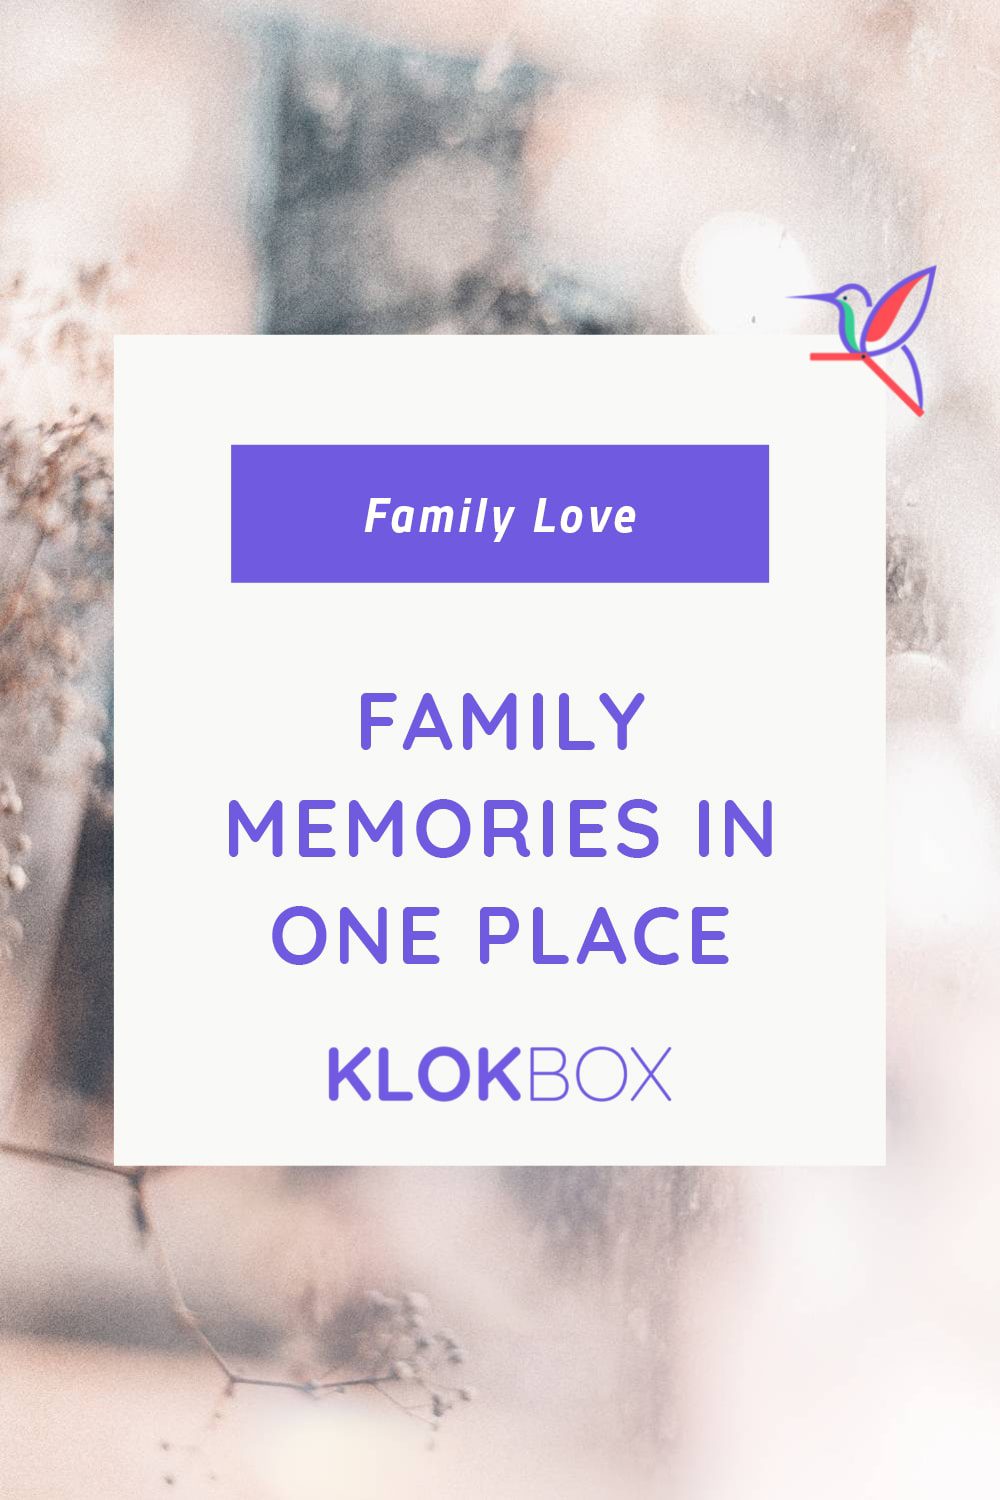 Family Memories In One Place. Digital Memory Box - Safely Store & Share Your Love